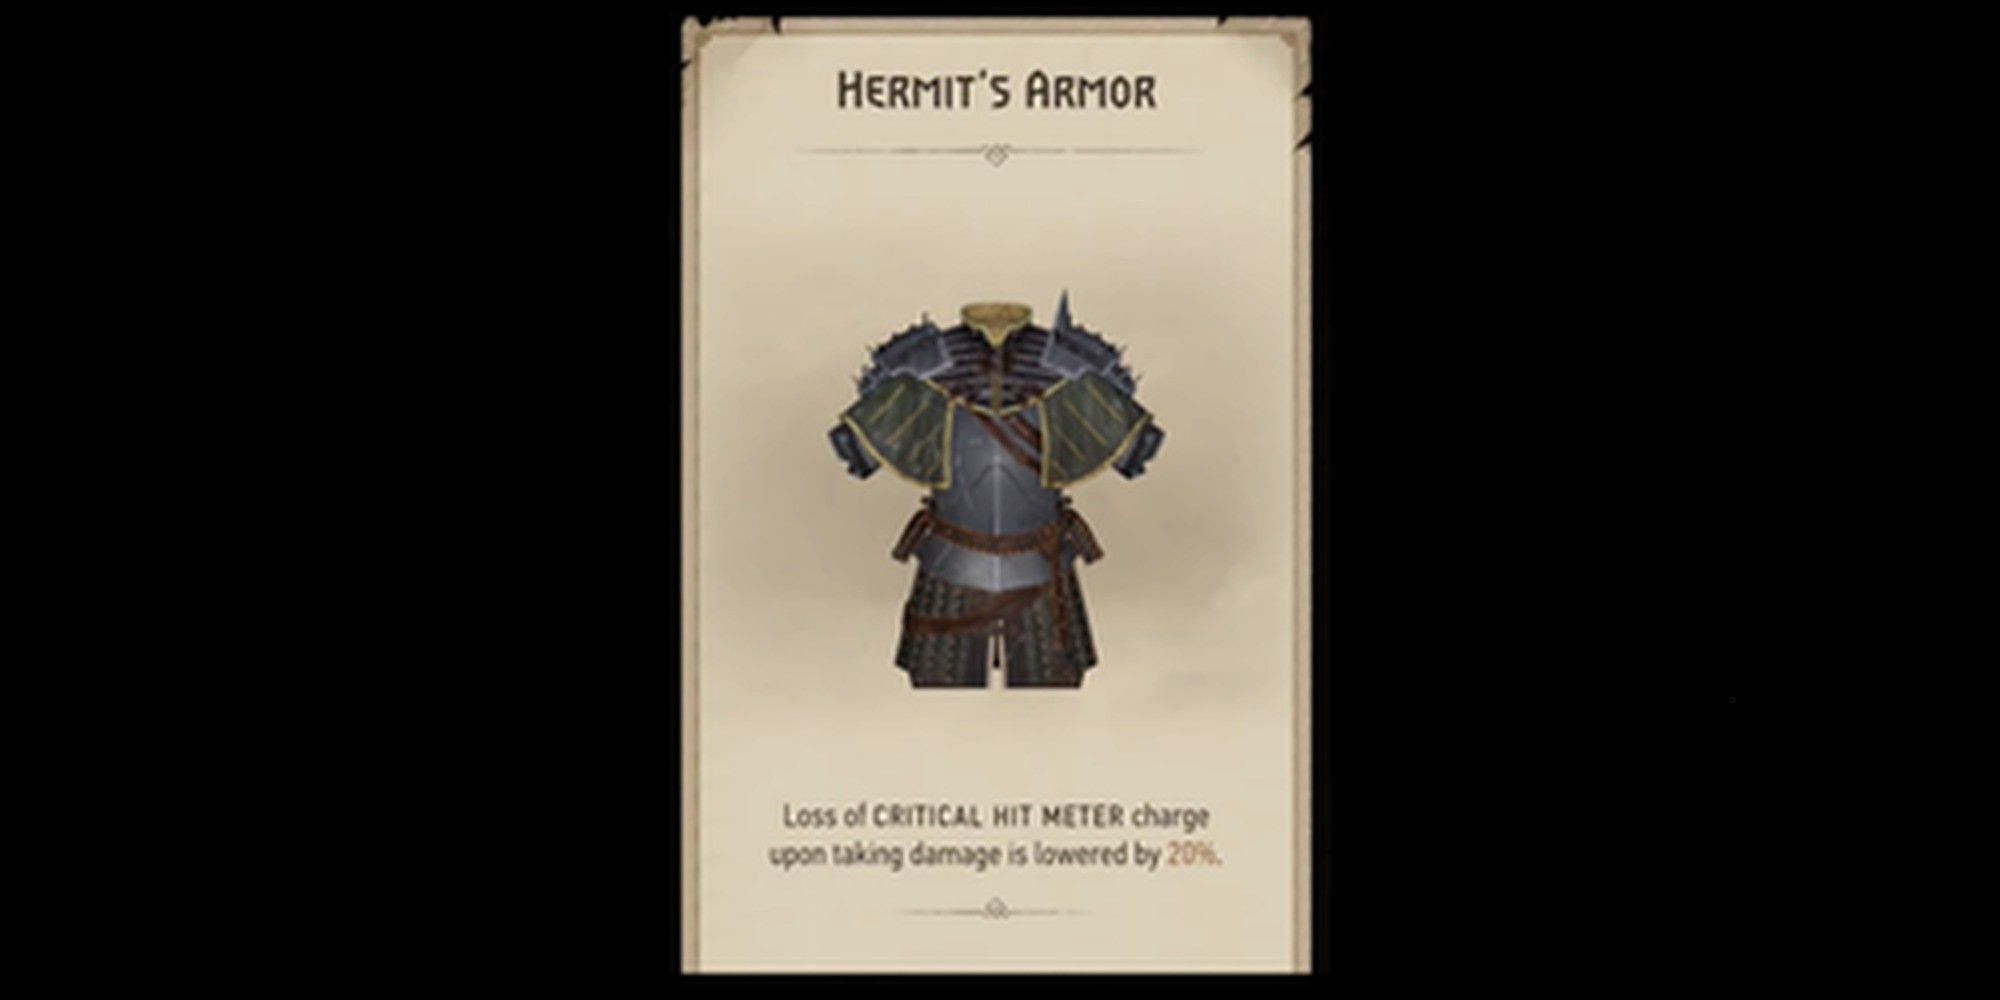 The Hermit's armor from The Witcher Monster slayer